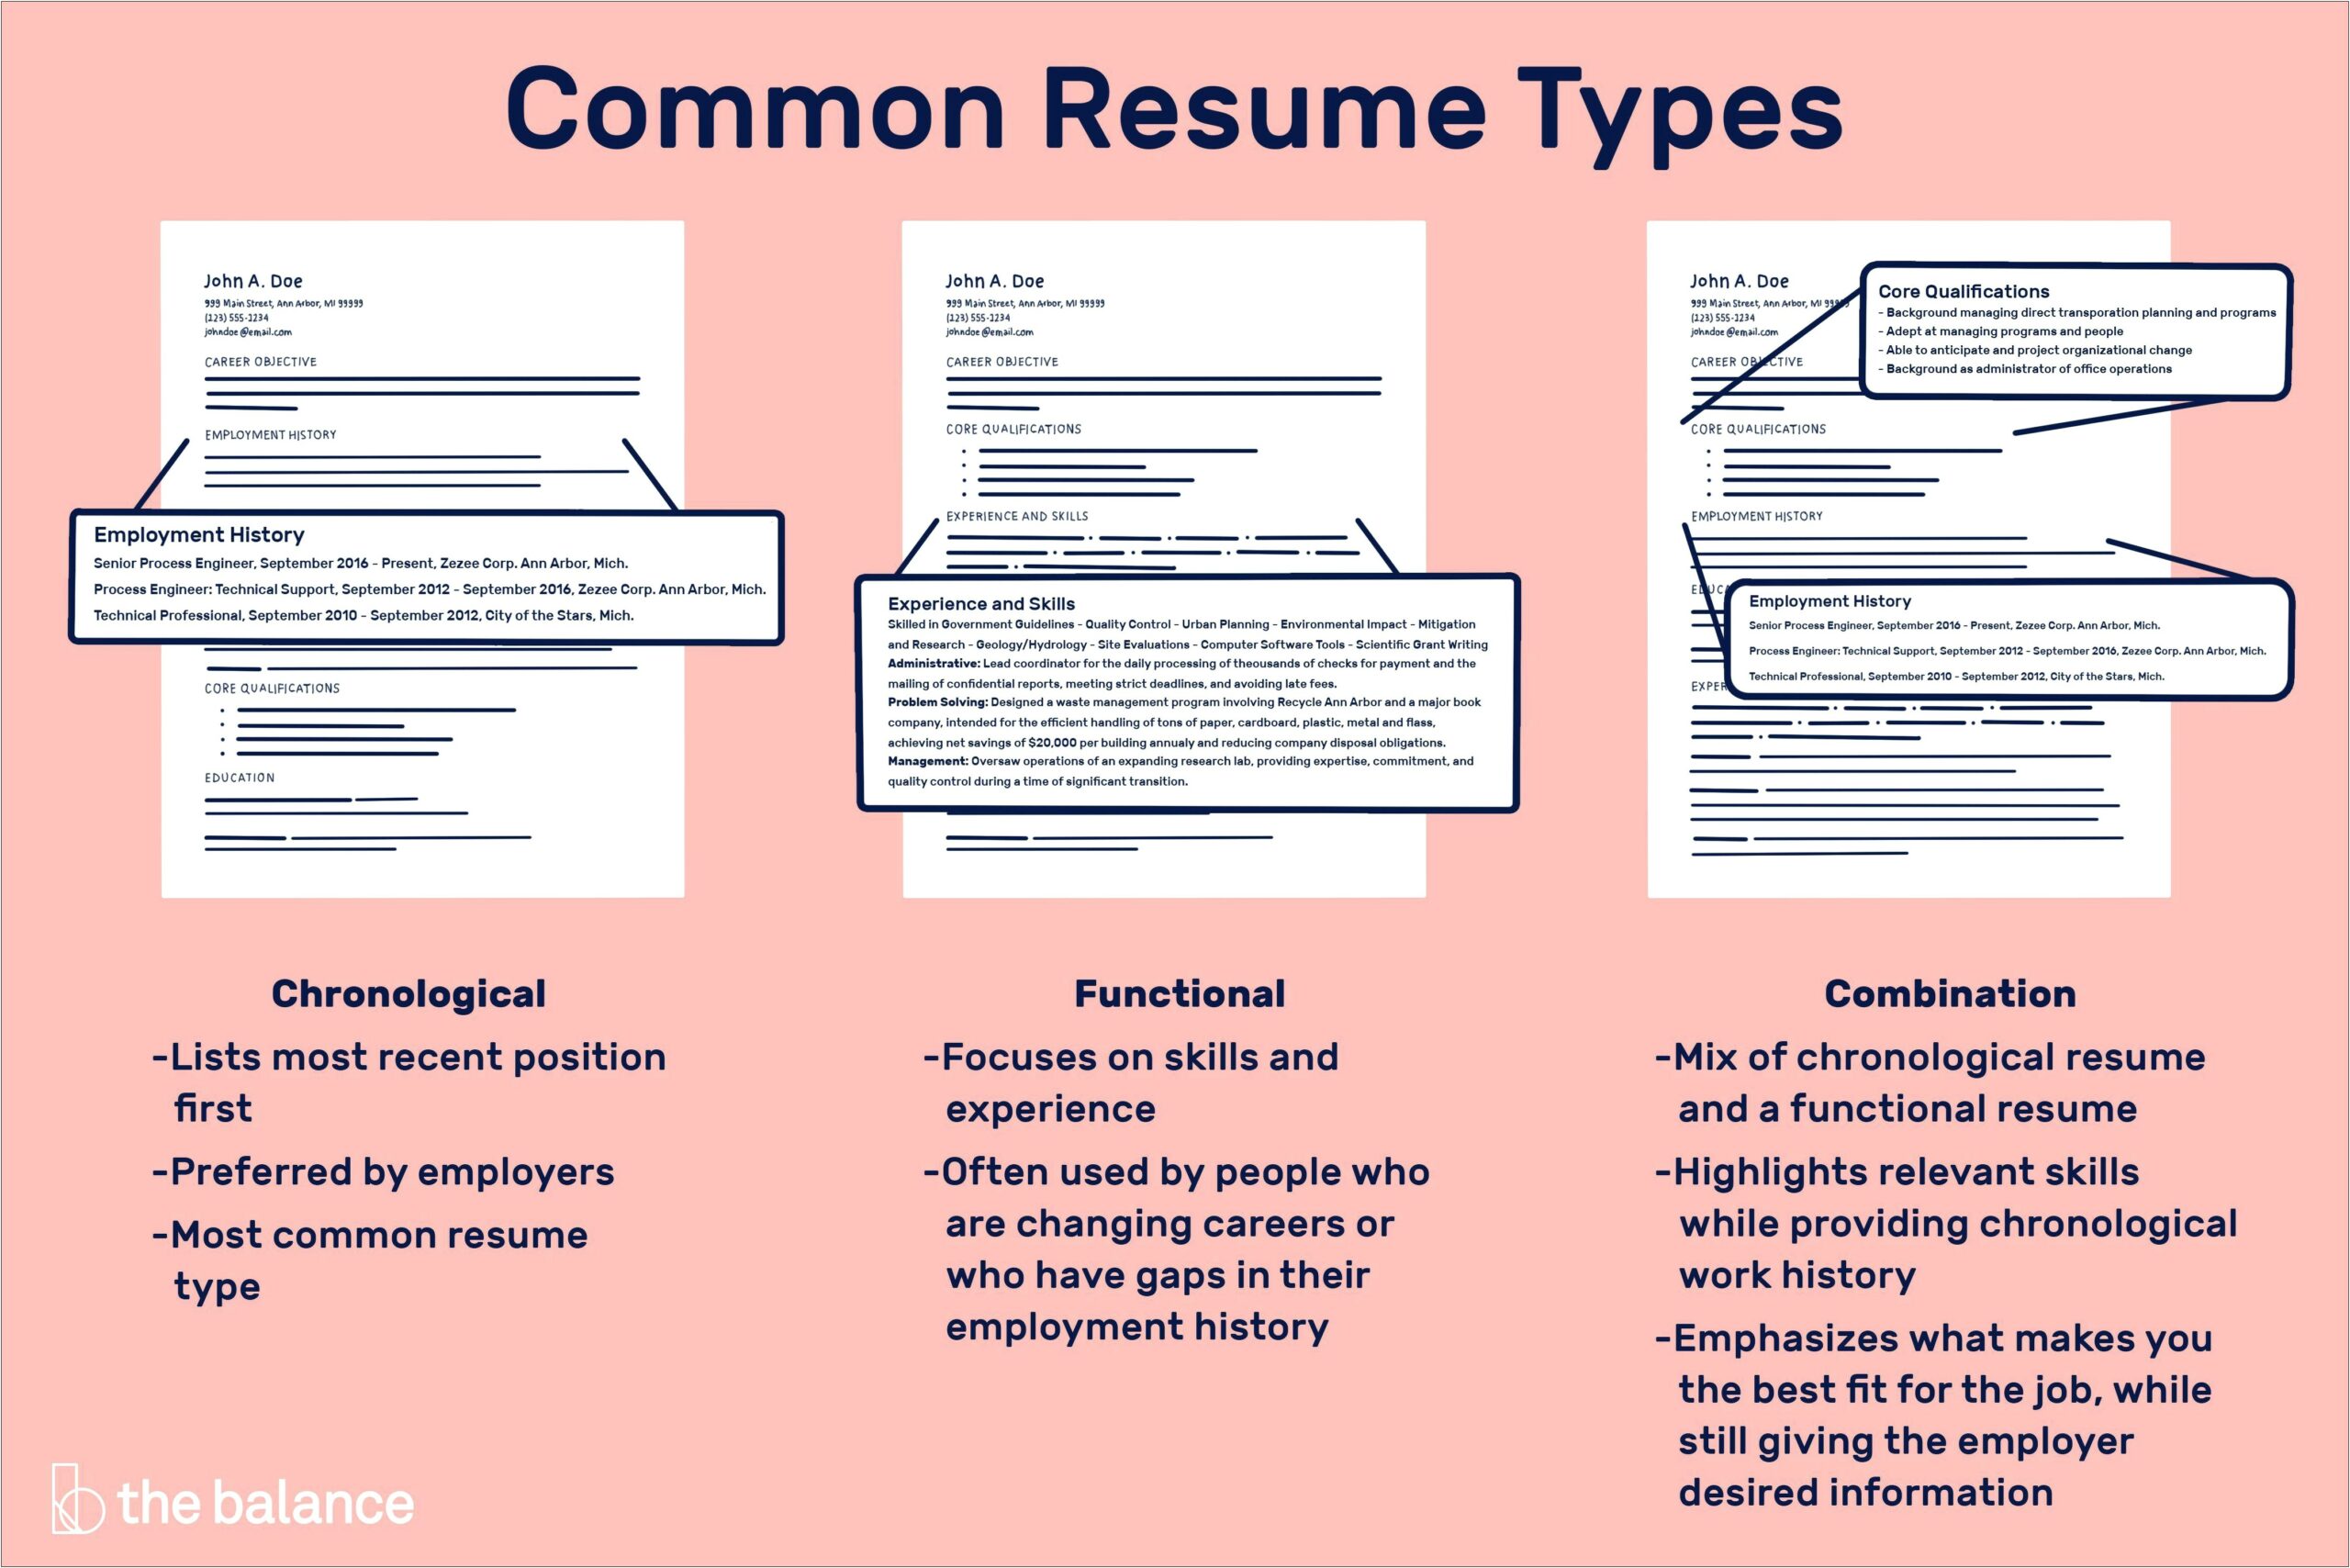 Examples Of Core Qualifications For Resume